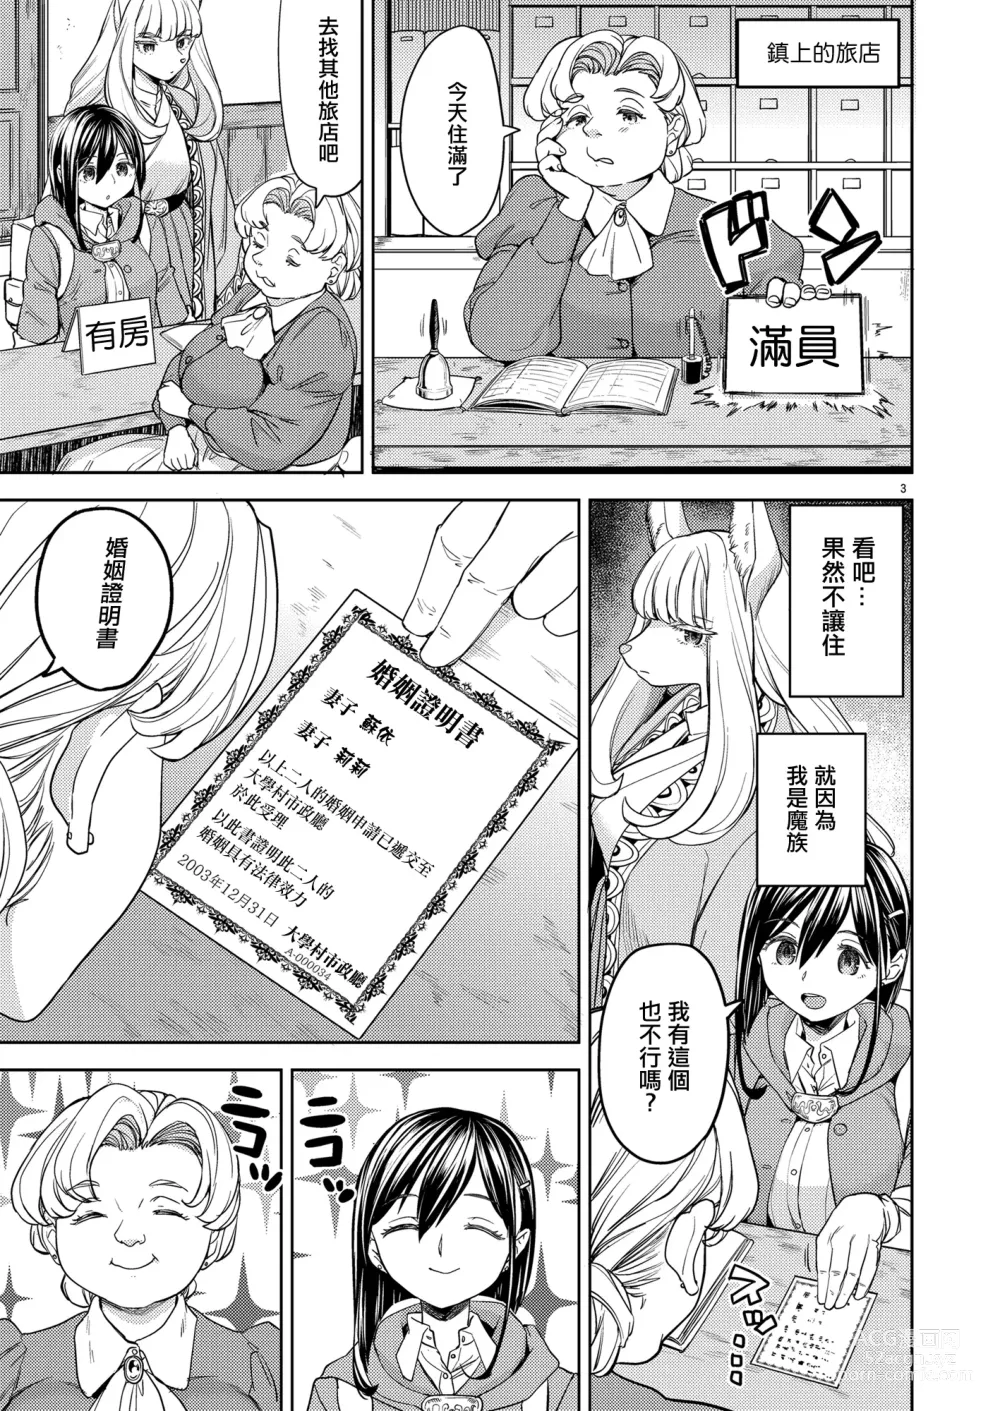 Page 7 of doujinshi 來一場蜜月旅行